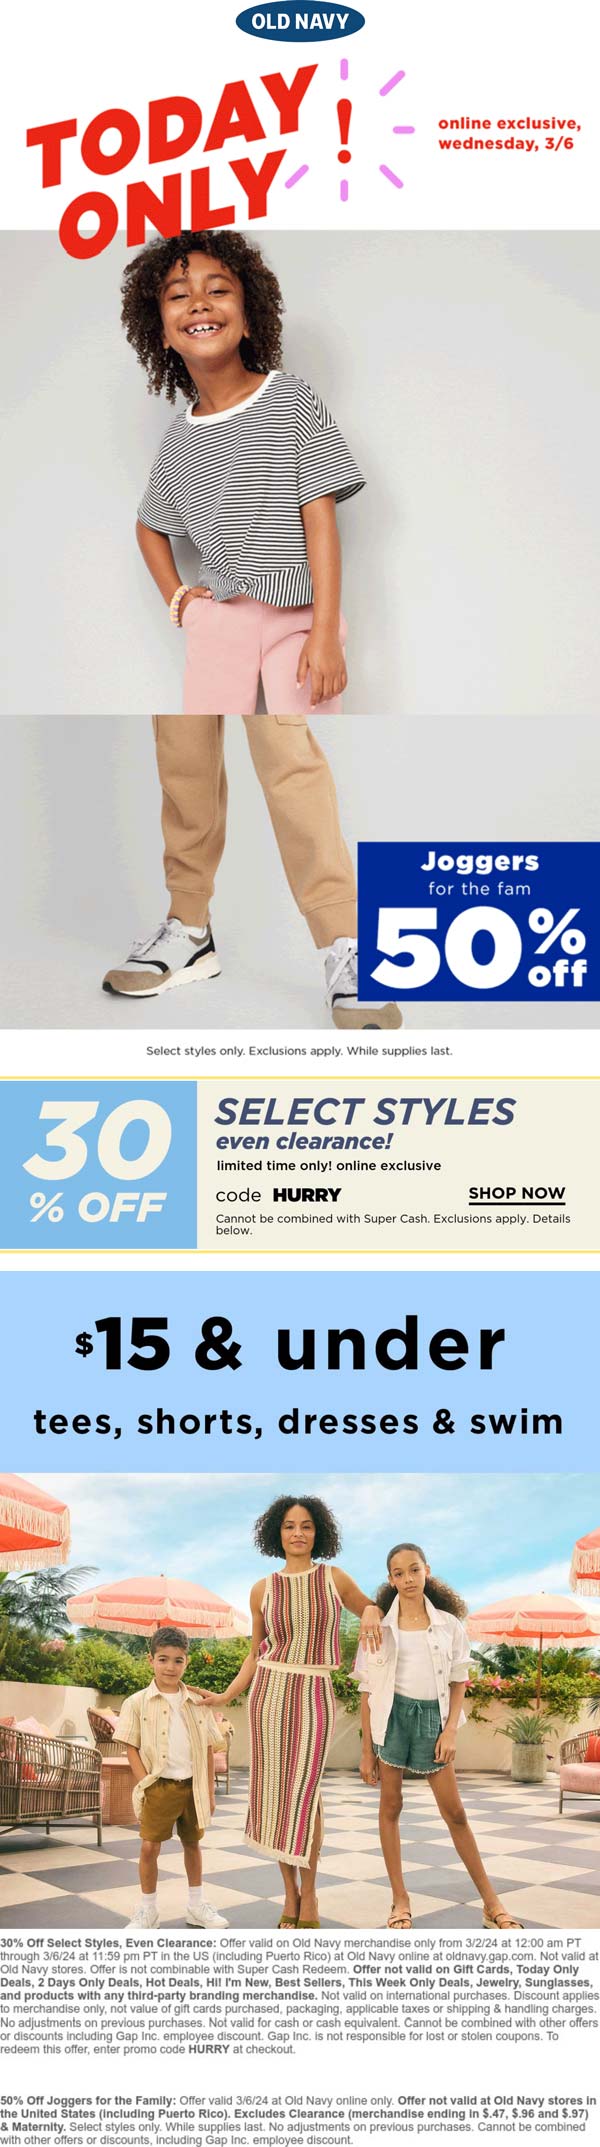 Old Navy stores Coupon  50% off joggers & more today at Old Navy #oldnavy 